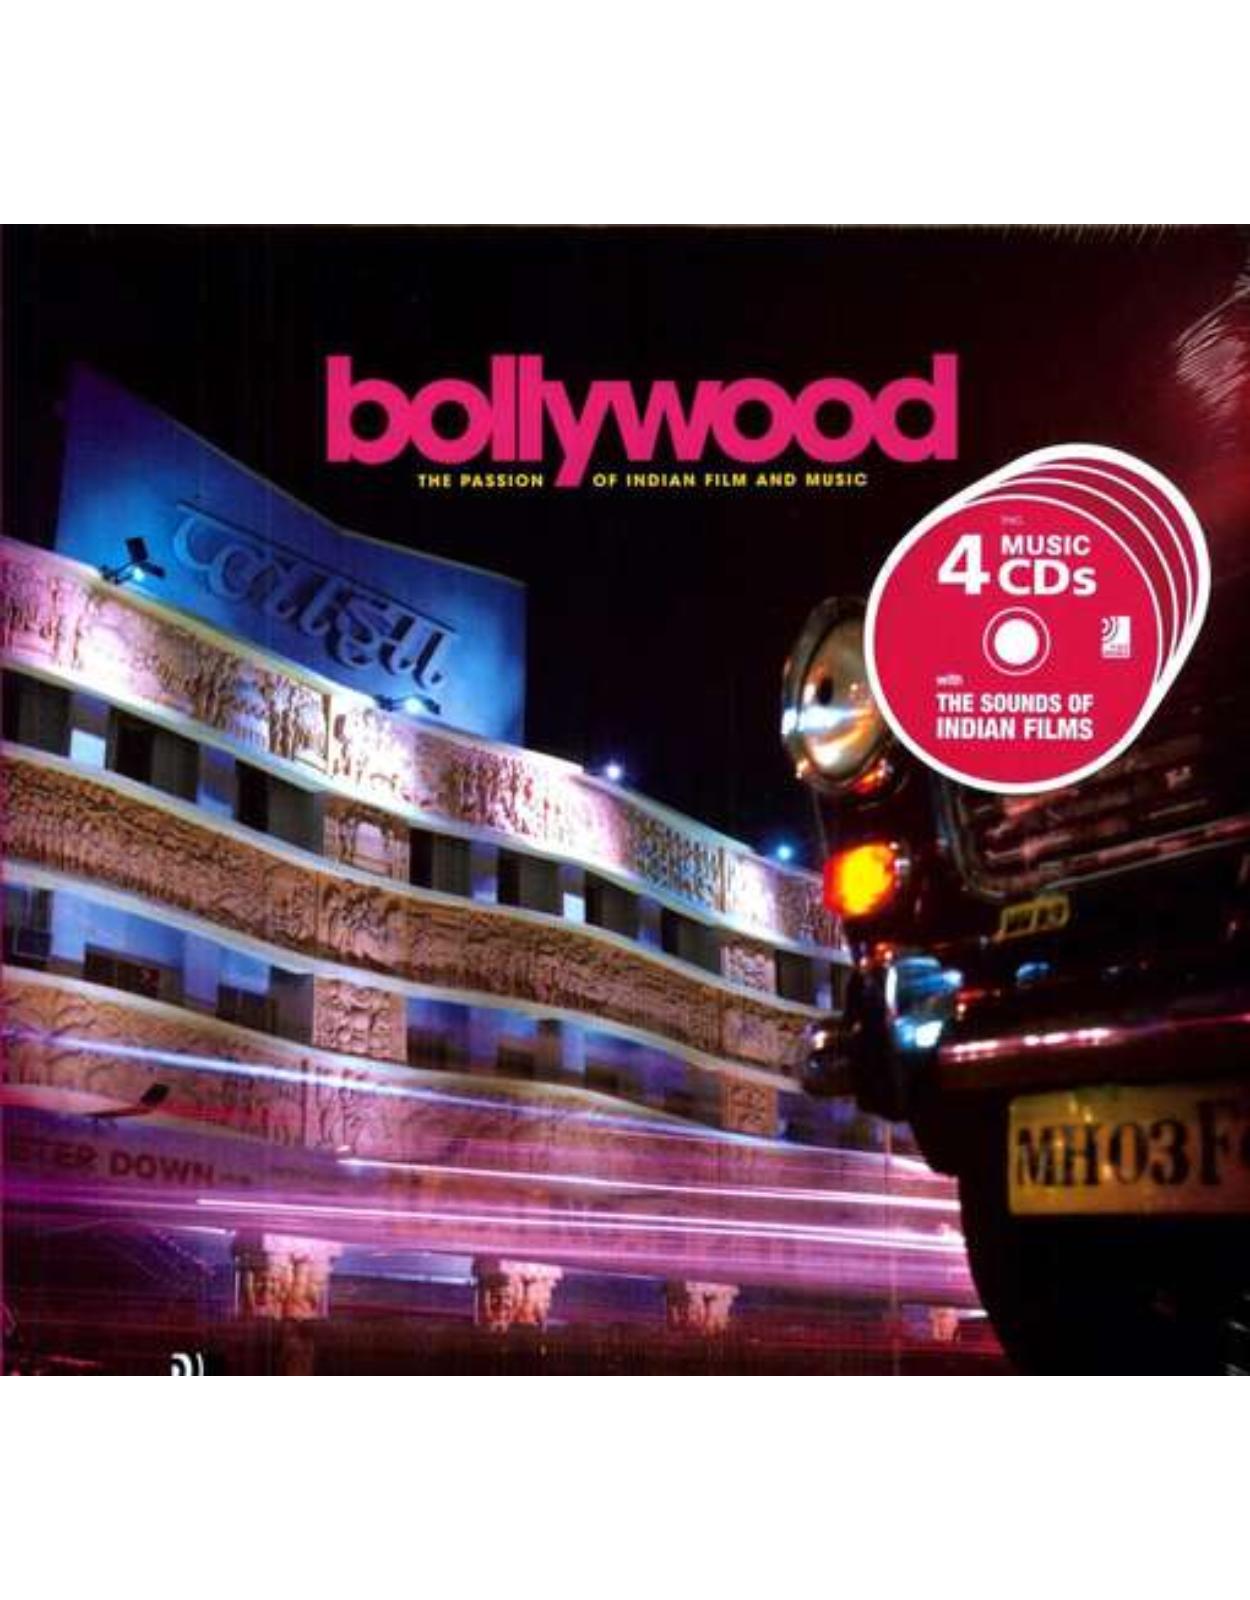 Bollywood: The Passion of Indian Film and Music (earBooks)